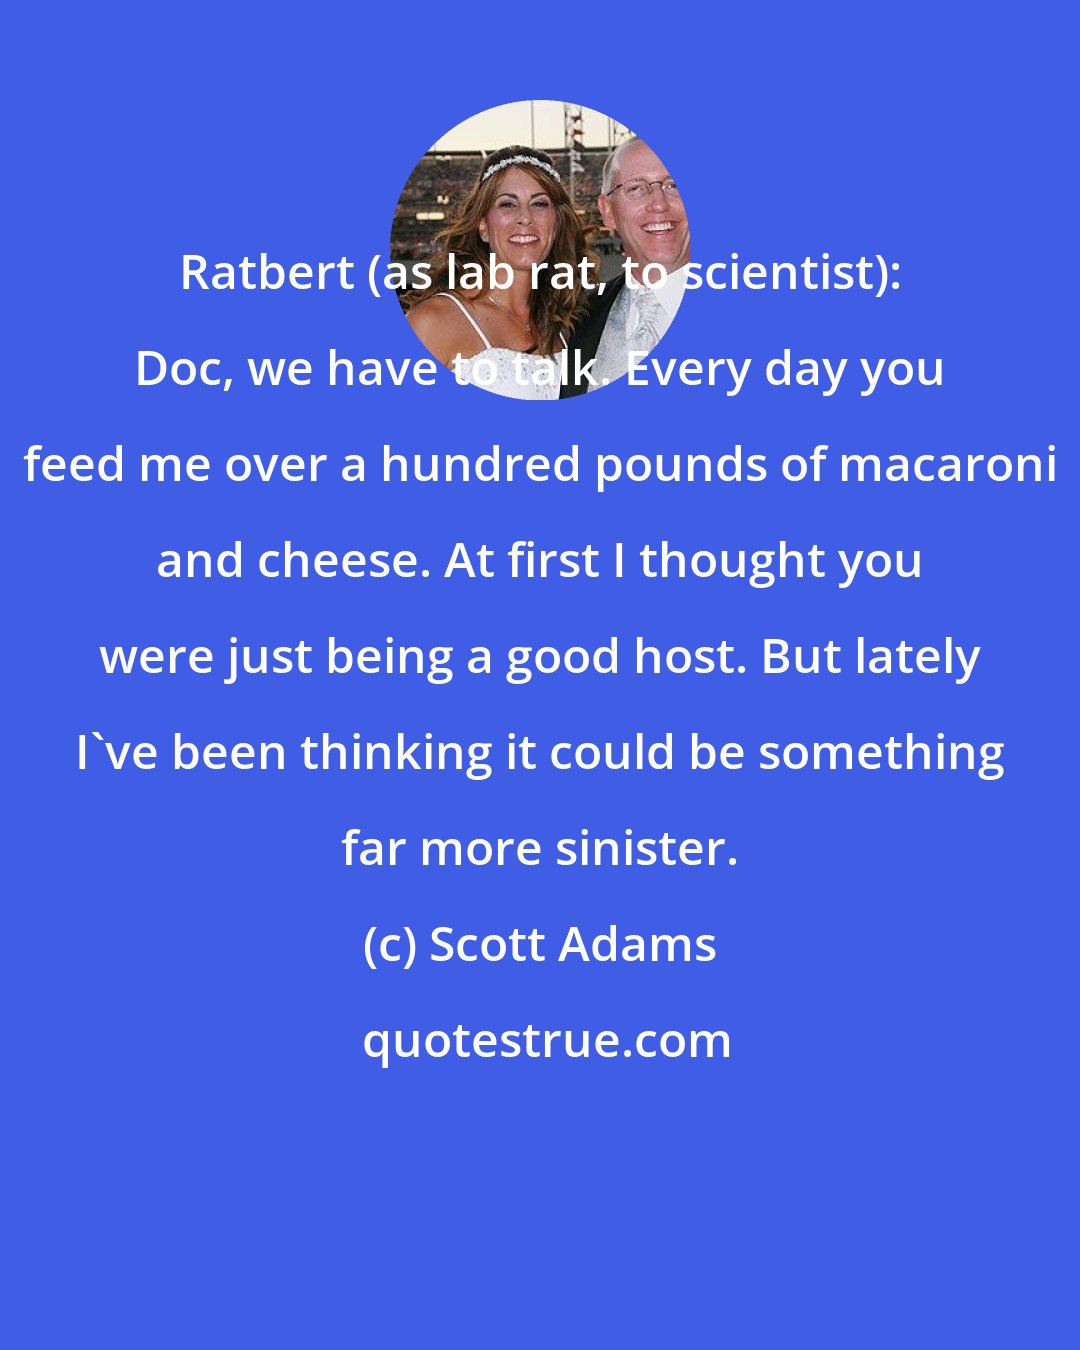 Scott Adams: Ratbert (as lab rat, to scientist): Doc, we have to talk. Every day you feed me over a hundred pounds of macaroni and cheese. At first I thought you were just being a good host. But lately I've been thinking it could be something far more sinister.